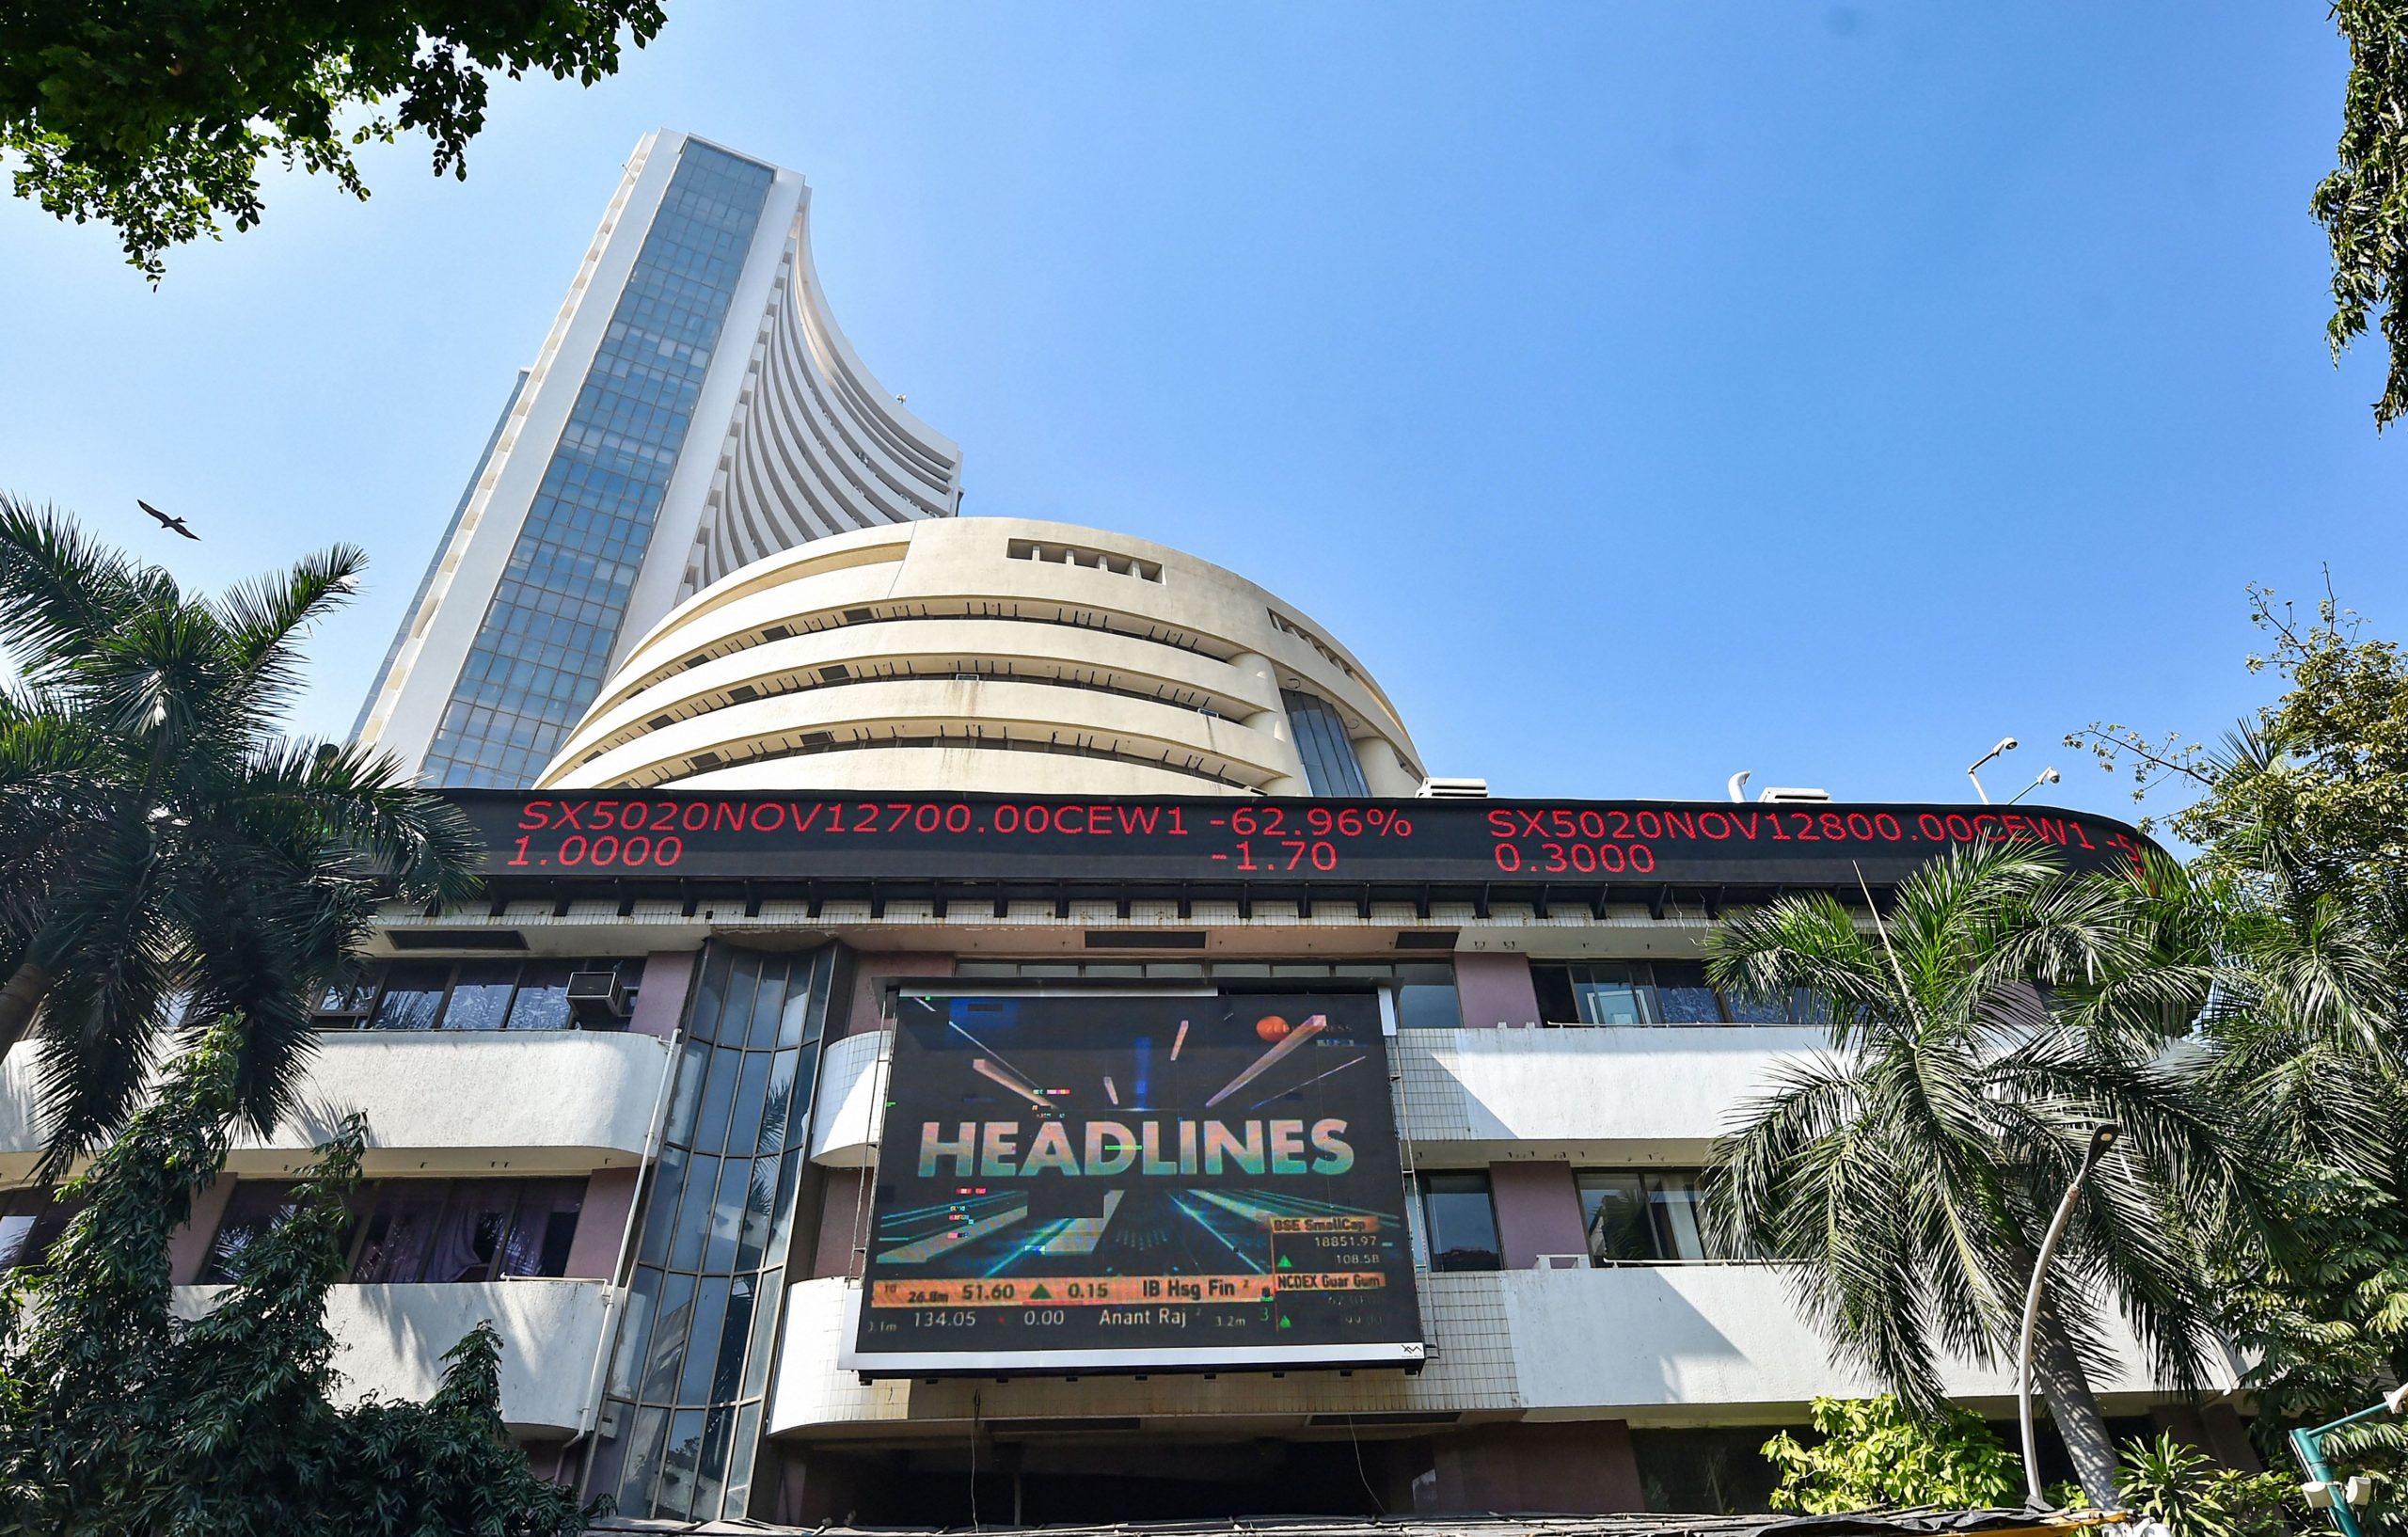 Indian Stock Market to remain closed today on account of Mahashivratri 2022